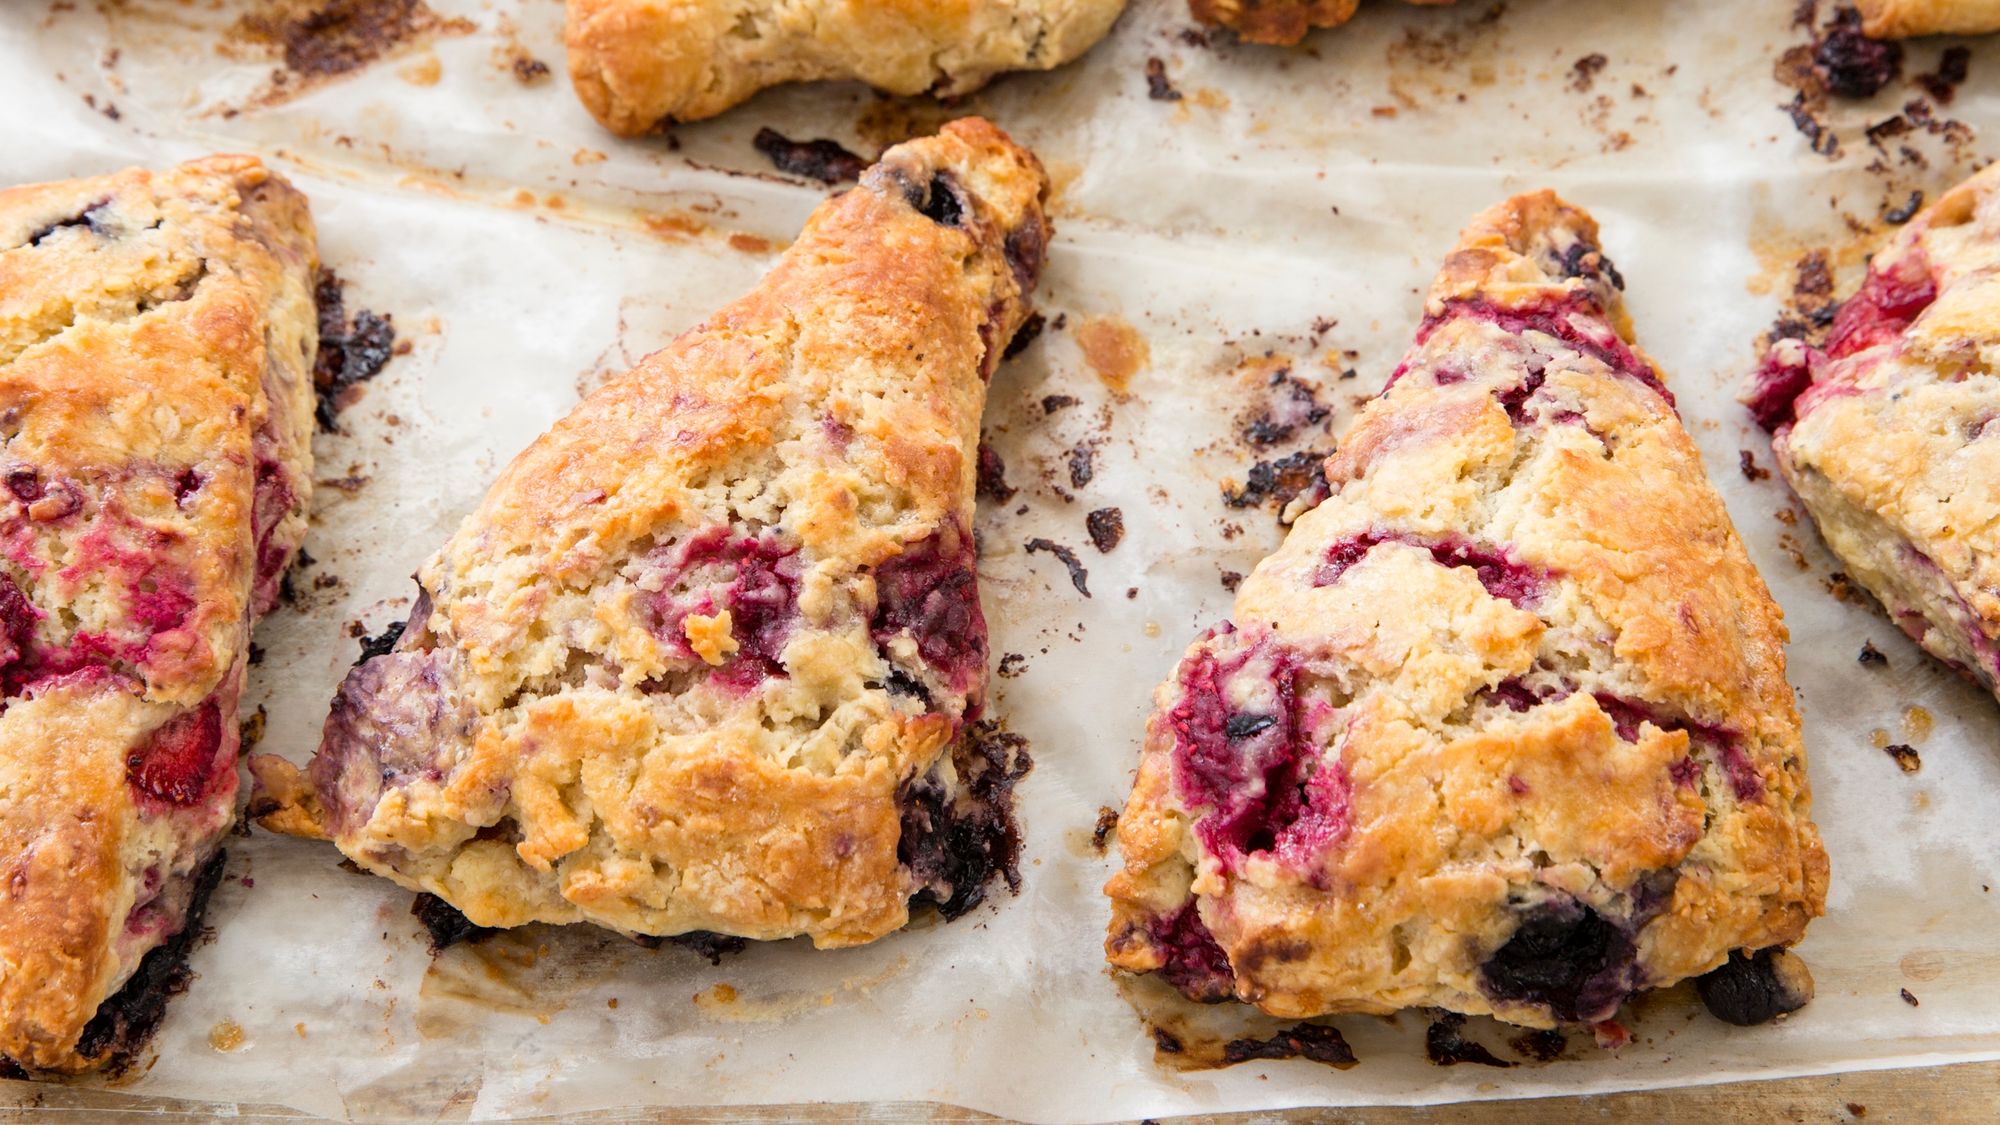 We’re spilling the tea on one of our most popular scone recipes